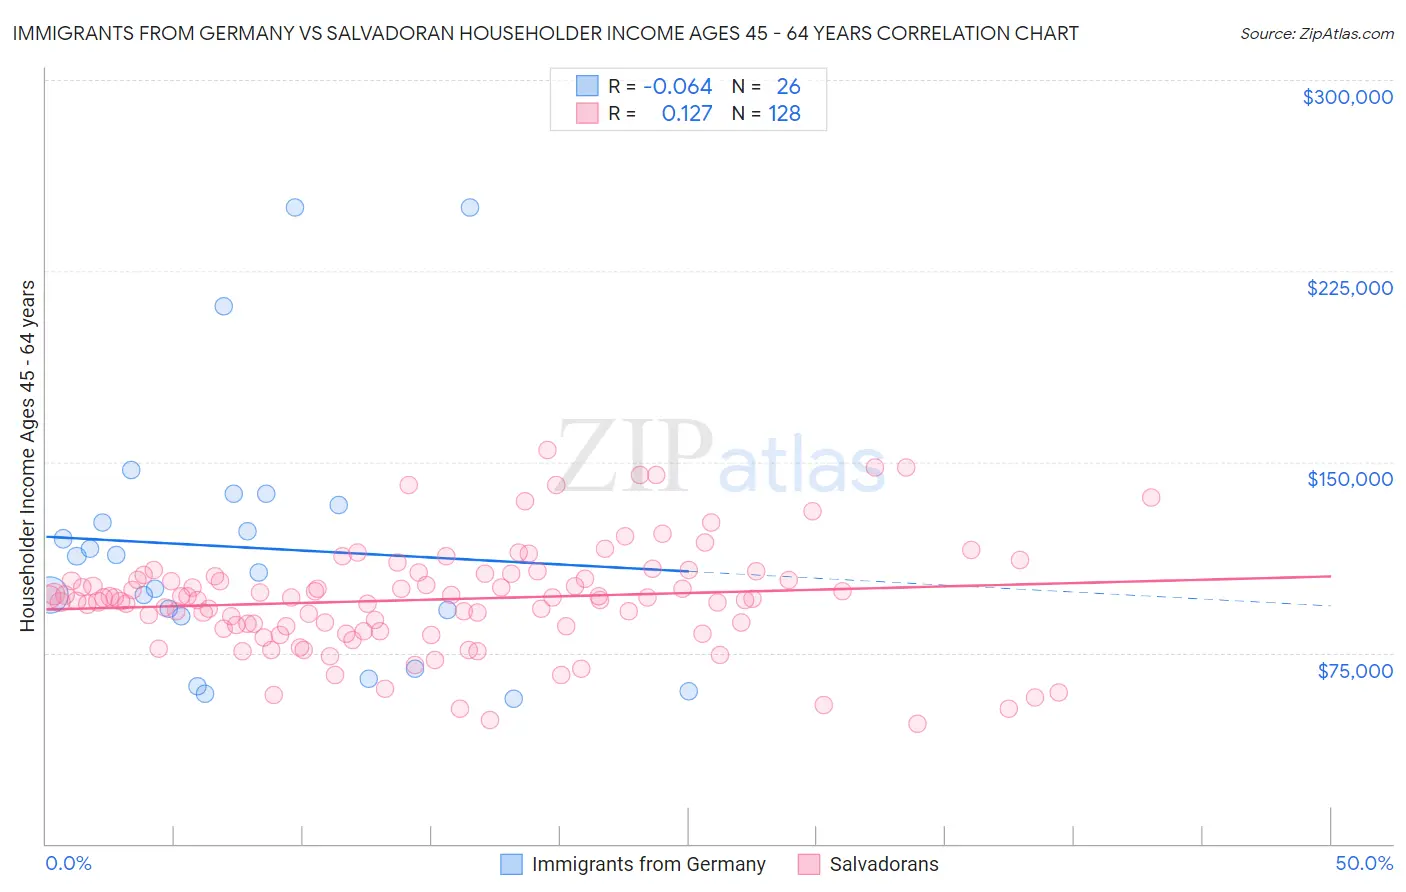 Immigrants from Germany vs Salvadoran Householder Income Ages 45 - 64 years